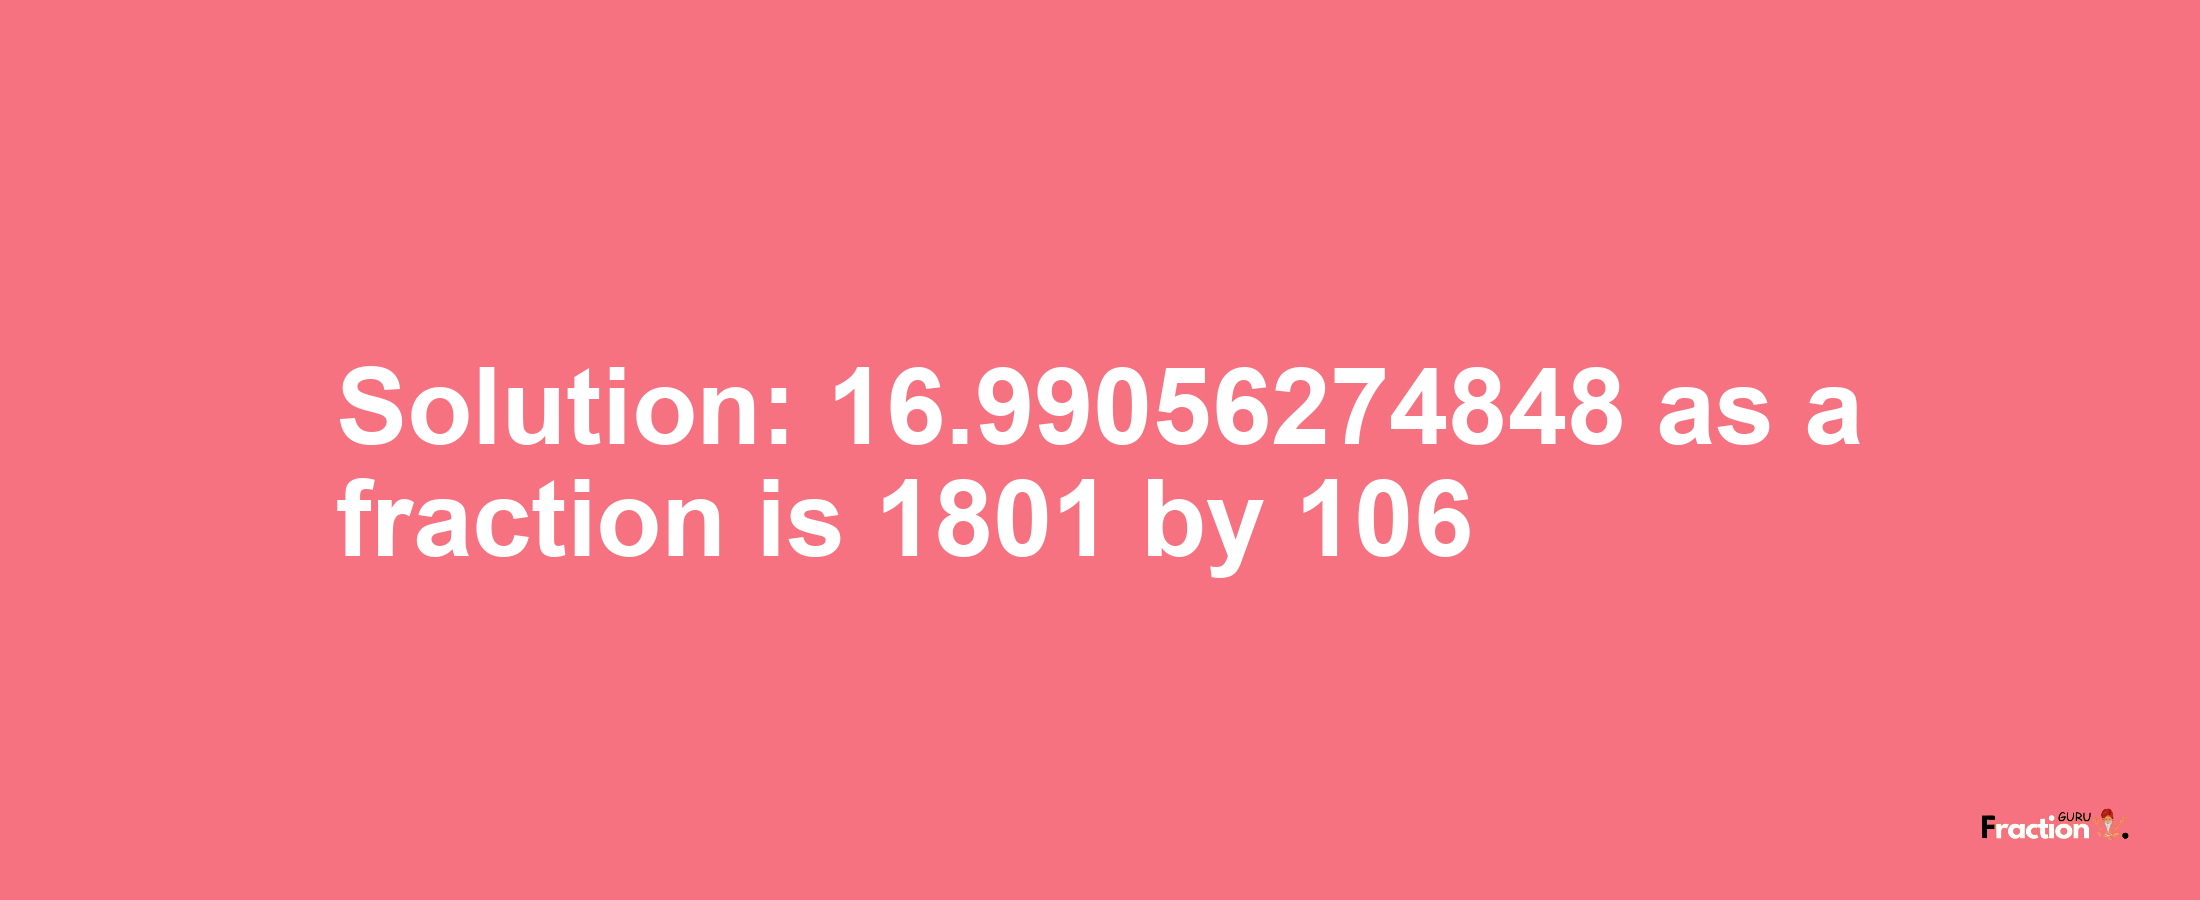 Solution:16.99056274848 as a fraction is 1801/106